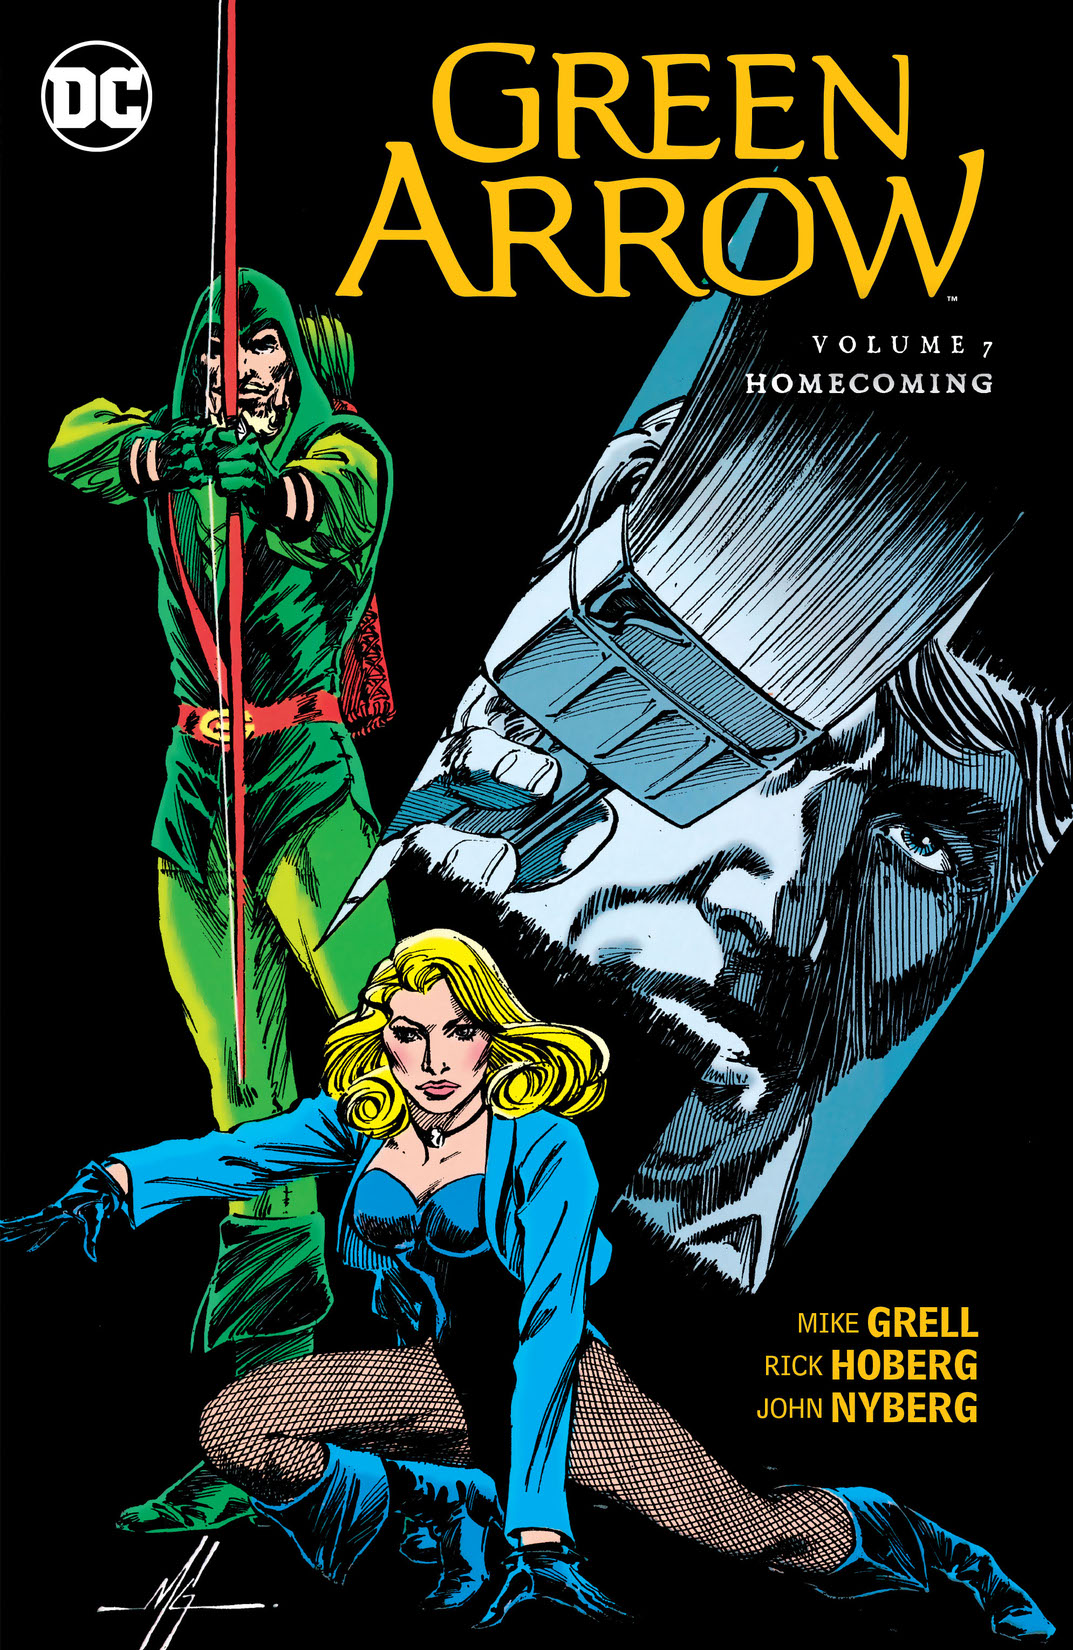 Green Arrow Vol. 7: Homecoming preview images